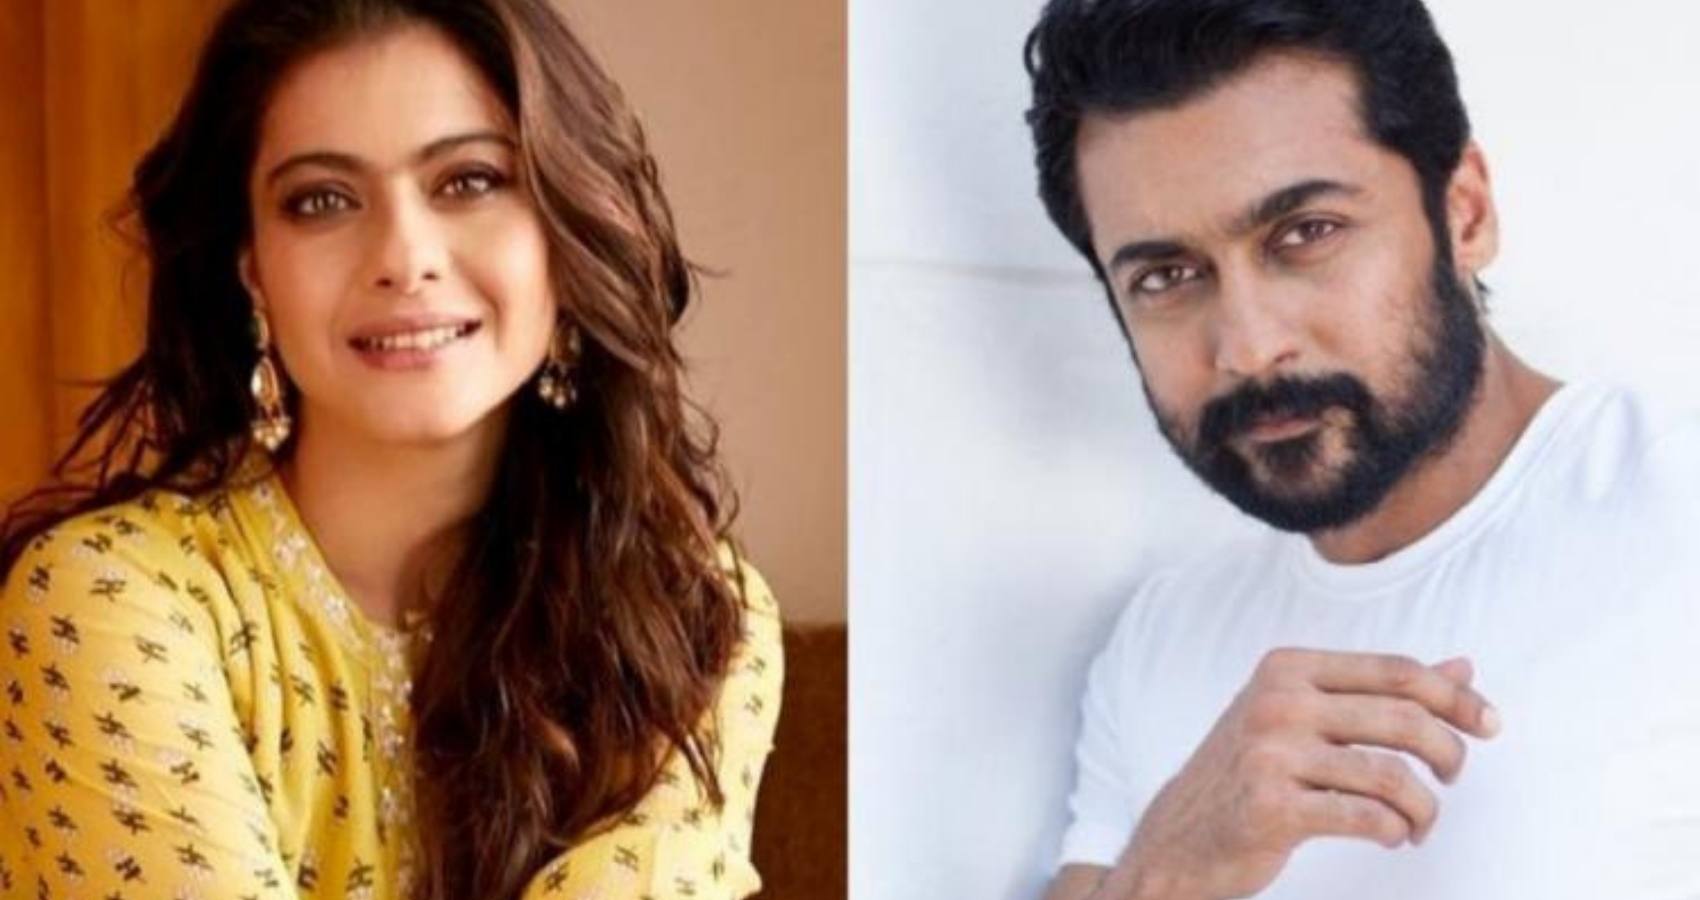 Indian Actors Kajol, Suriya Among New Members Of The Academy Of Motion Picture Arts And Science